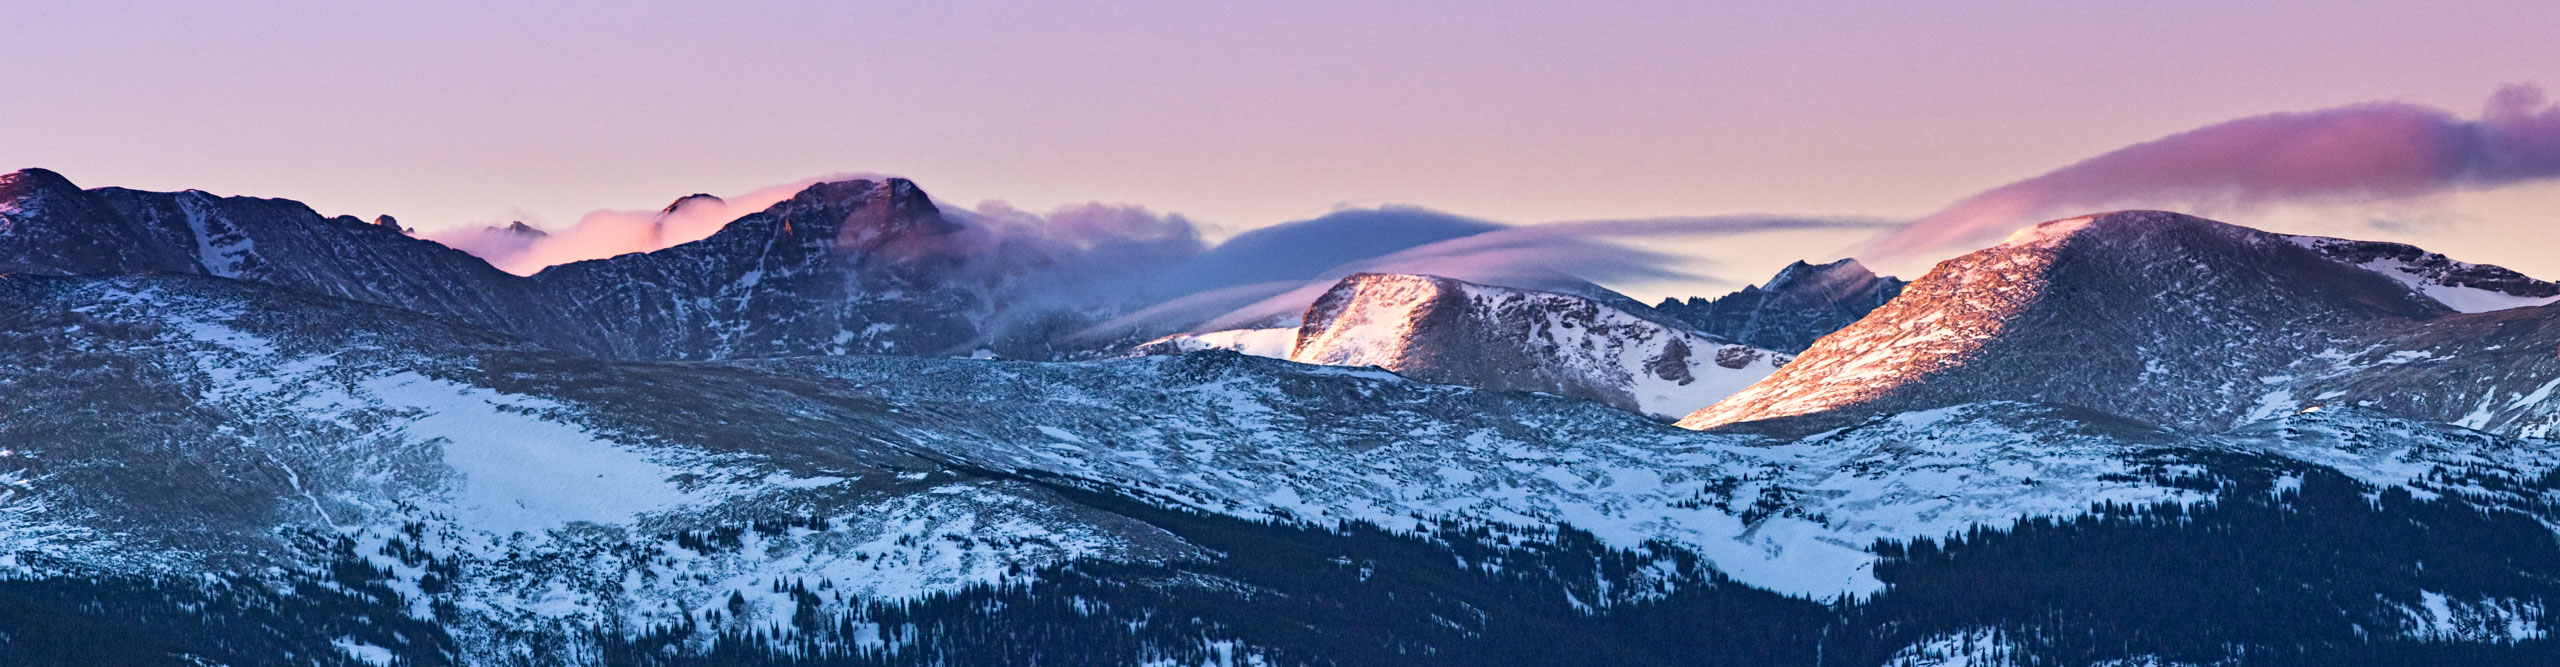 Twin Sisters in Rocky Mountain national park, at sunrise with a pink sky and fluffy clouds 